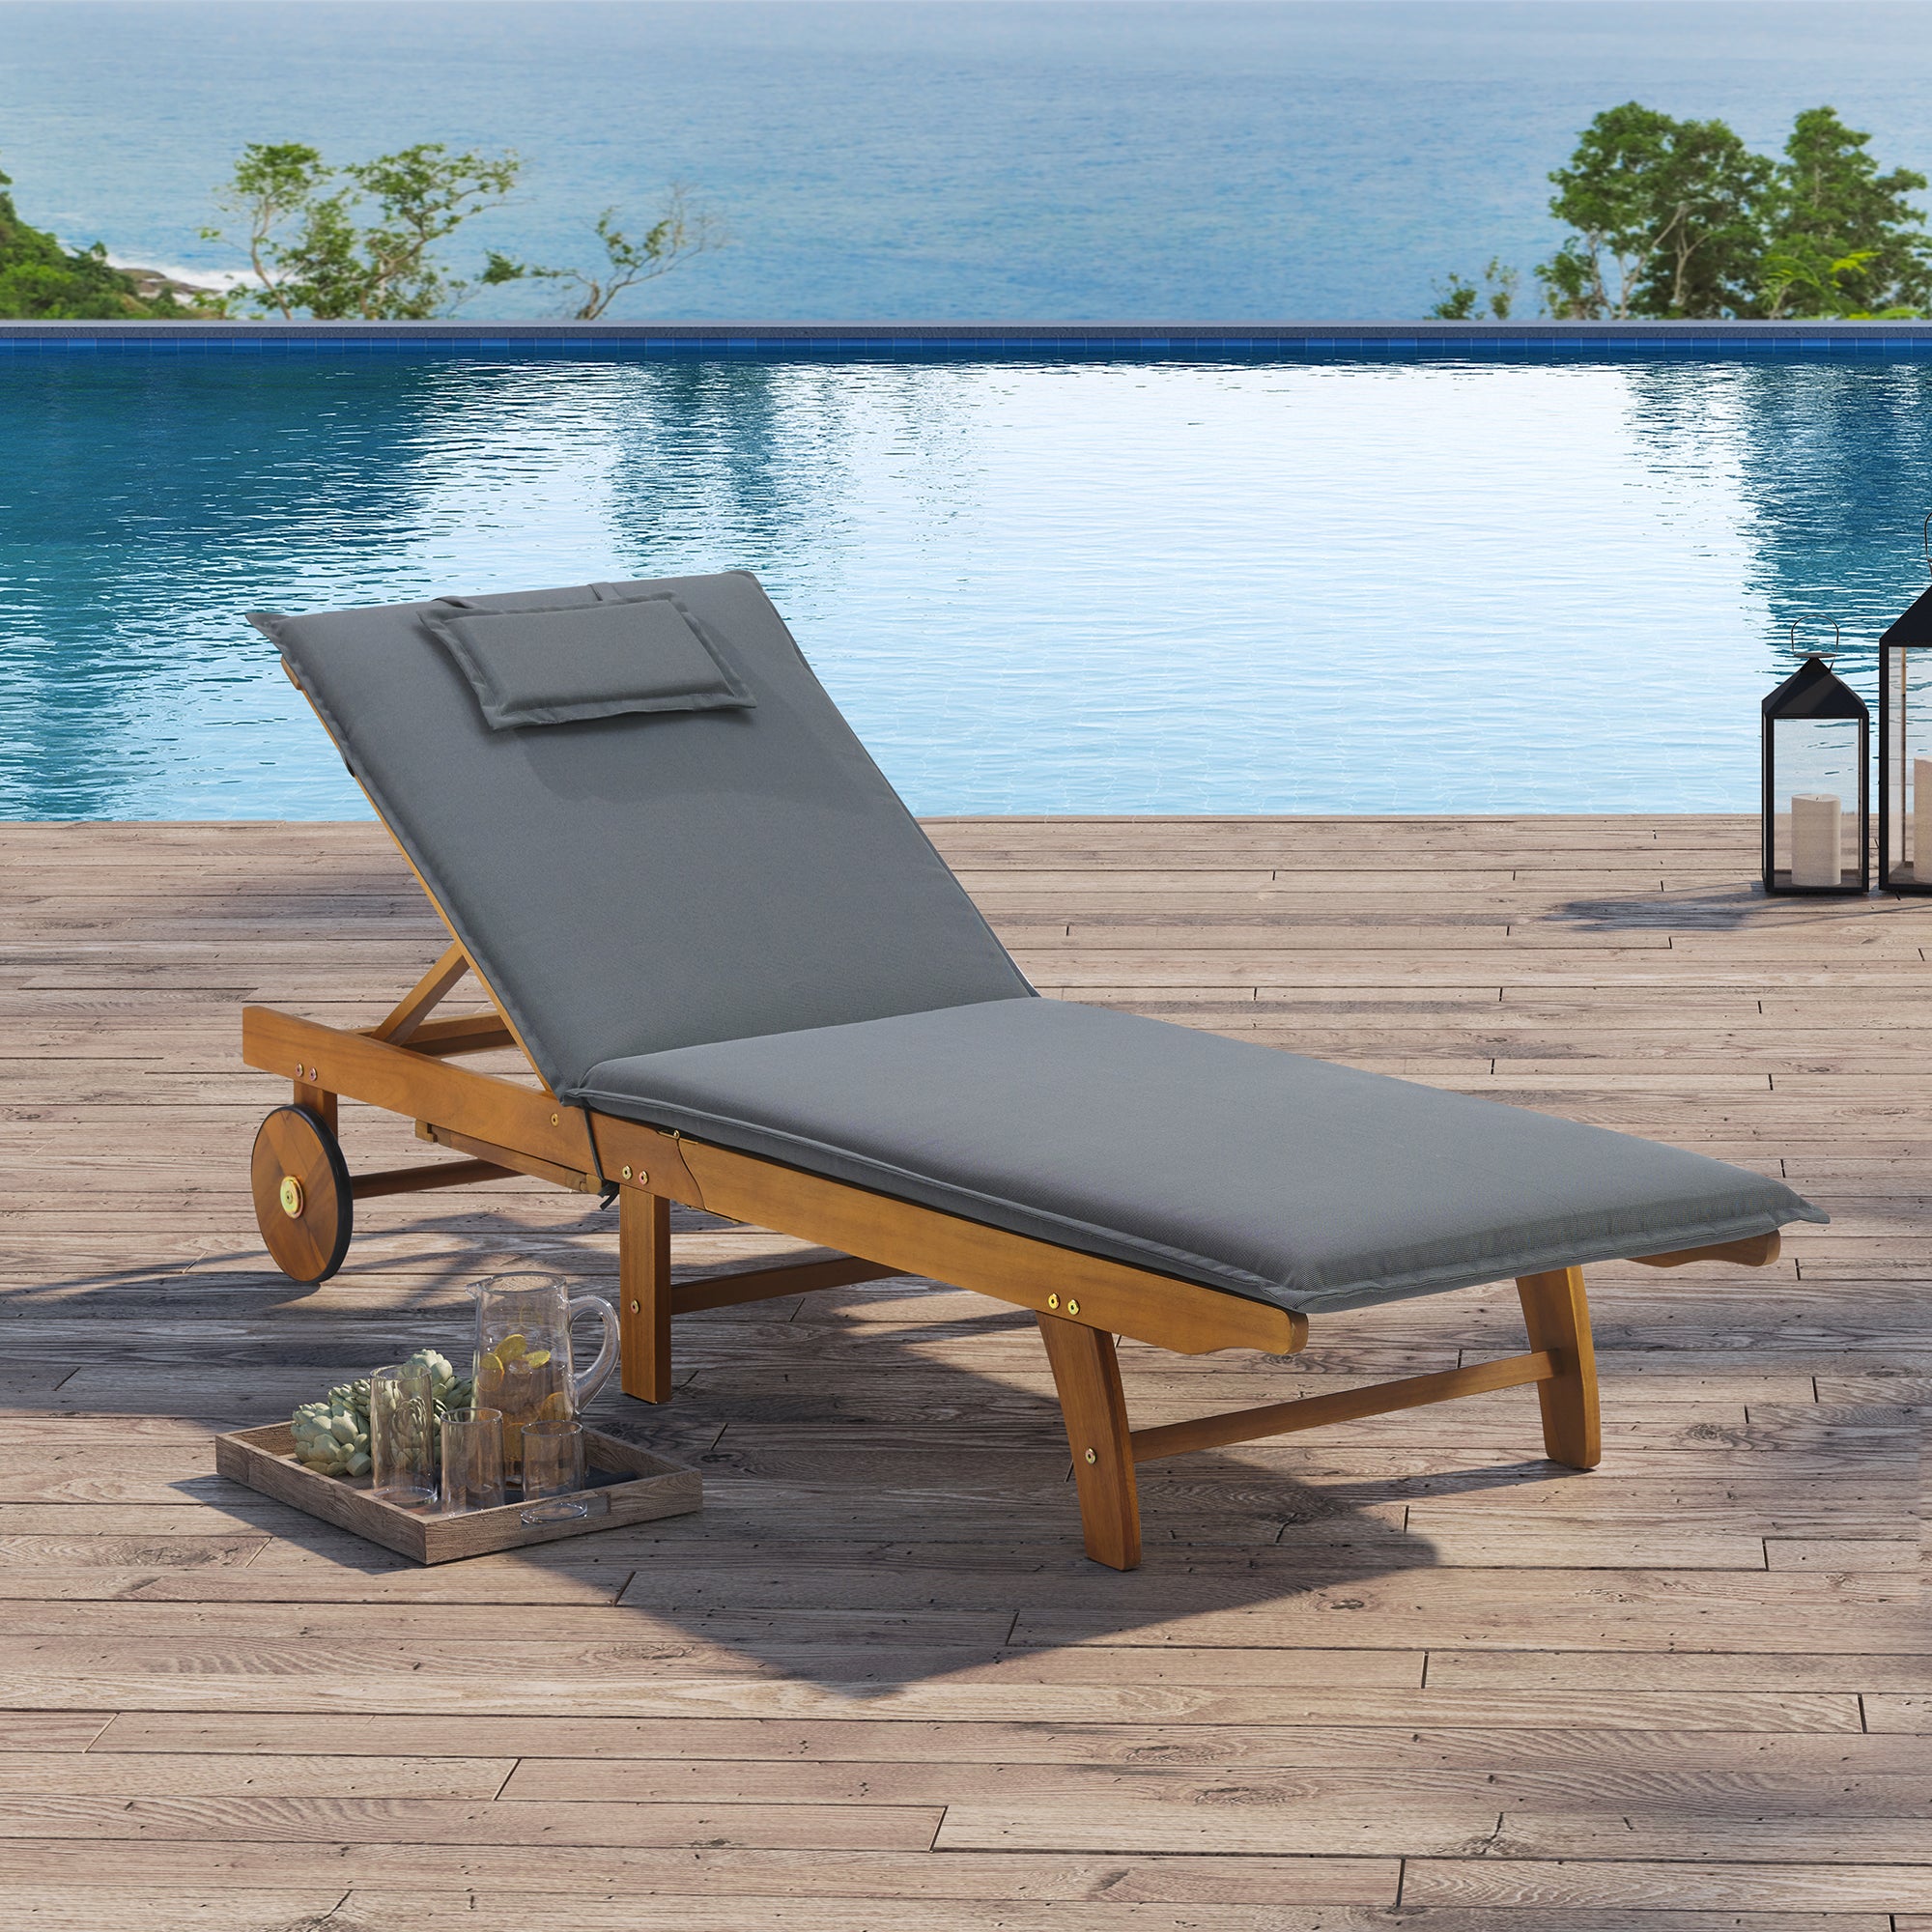 DukeLiving Cape Byron Wheeled Outdoor Hardwood Sun Lounger with Cushion & Tray (Charcoal)